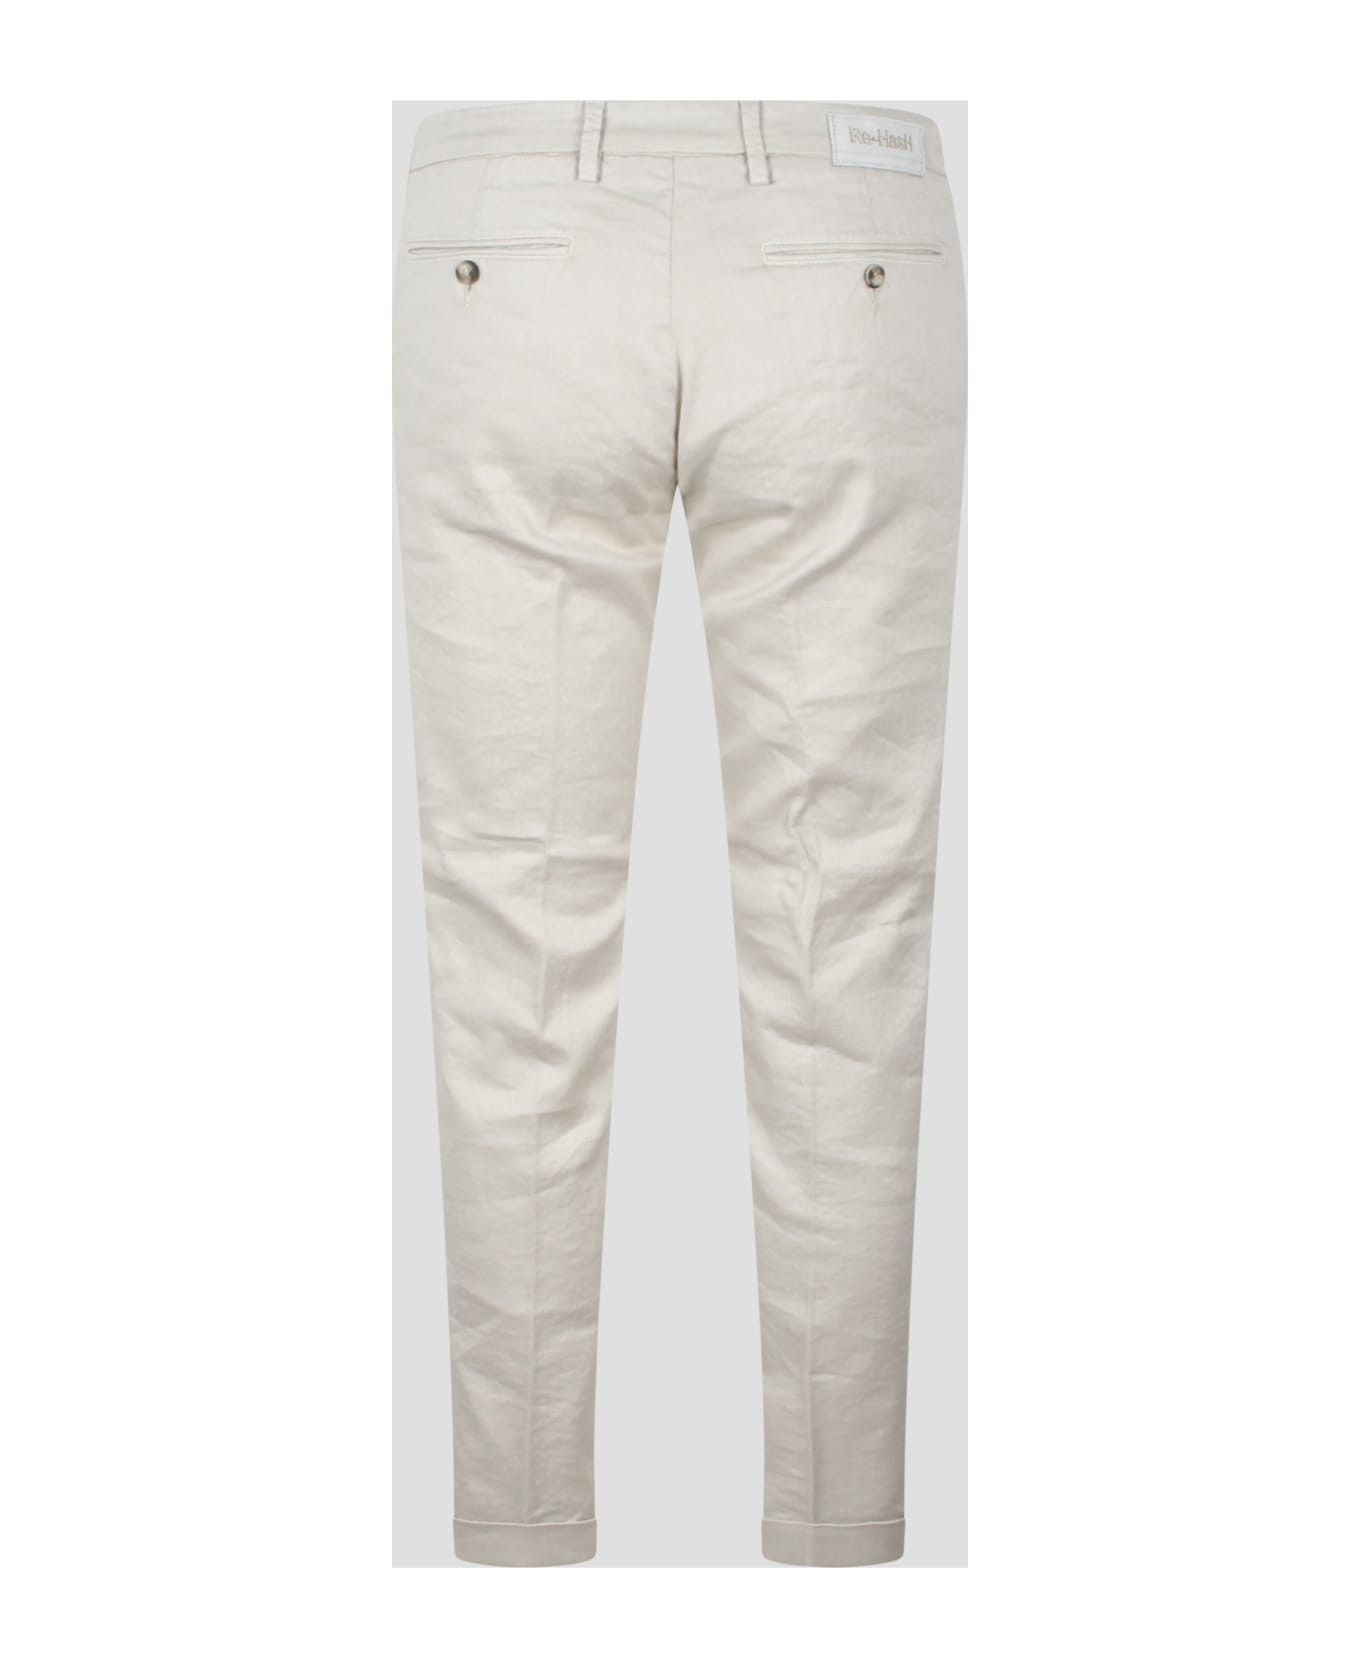 Re-HasH Mucha Chinos Pant - Nude & Neutrals ボトムス